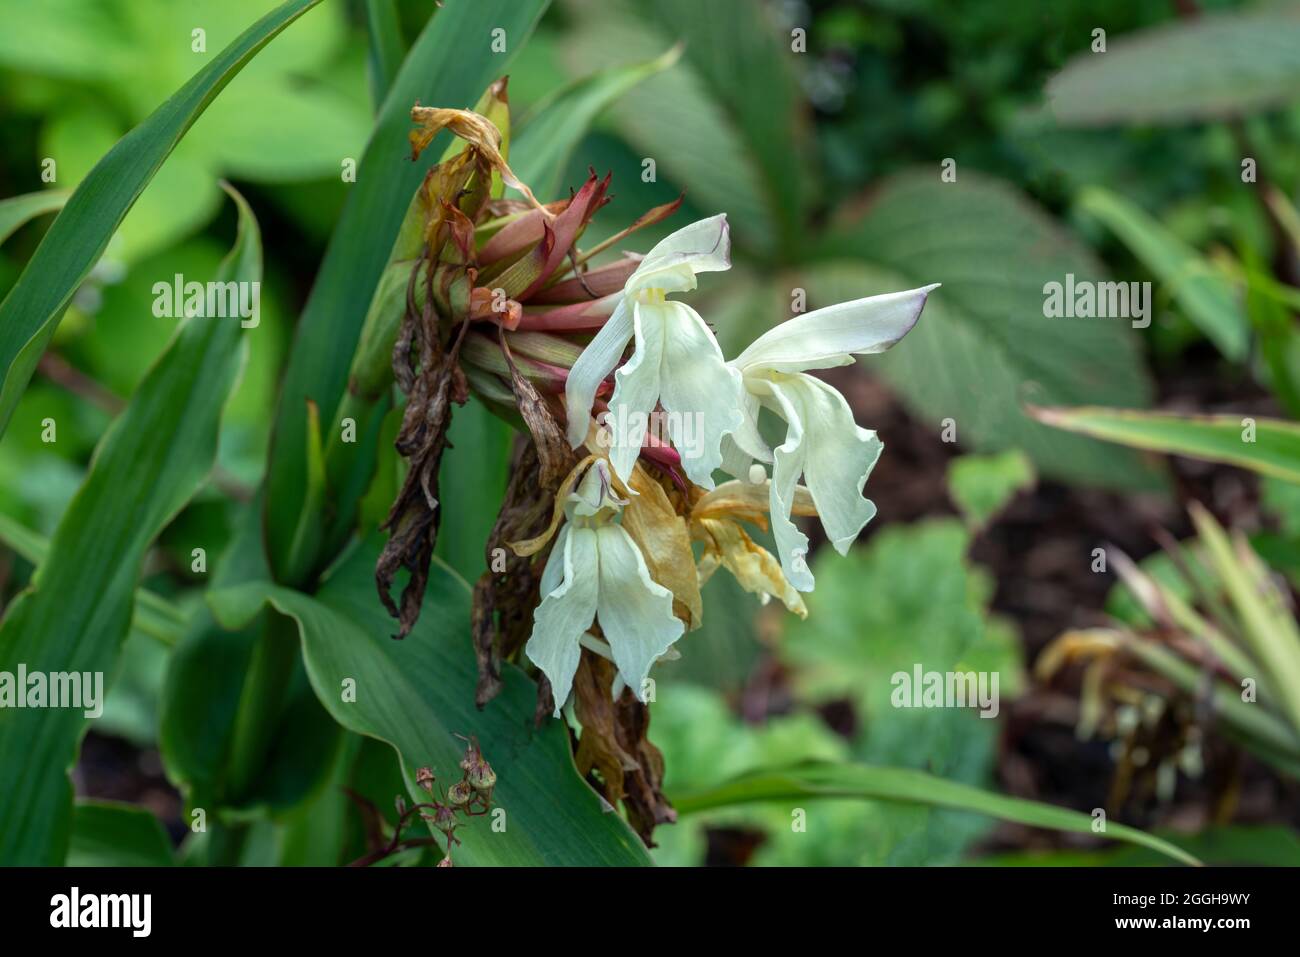 Roscoea x beesiana a summer flowering plant with a cream white summertime flower, stock photo image Stock Photo